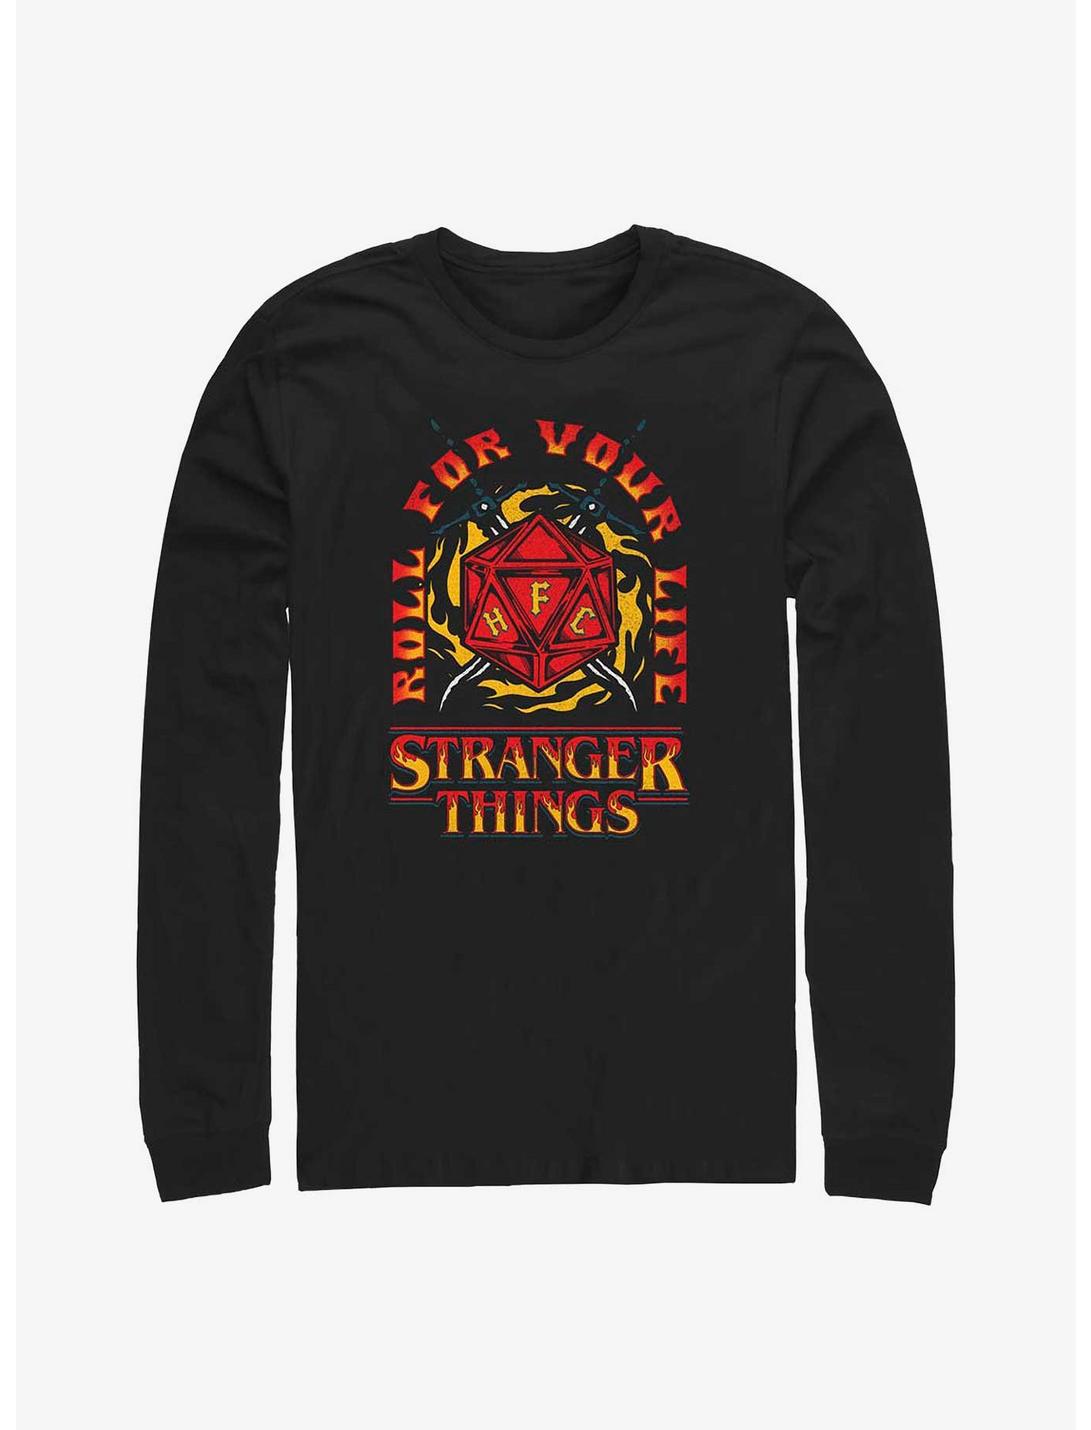 Stranger Things Fire And Dice Long-Sleeve T-Shirt, BLACK, hi-res